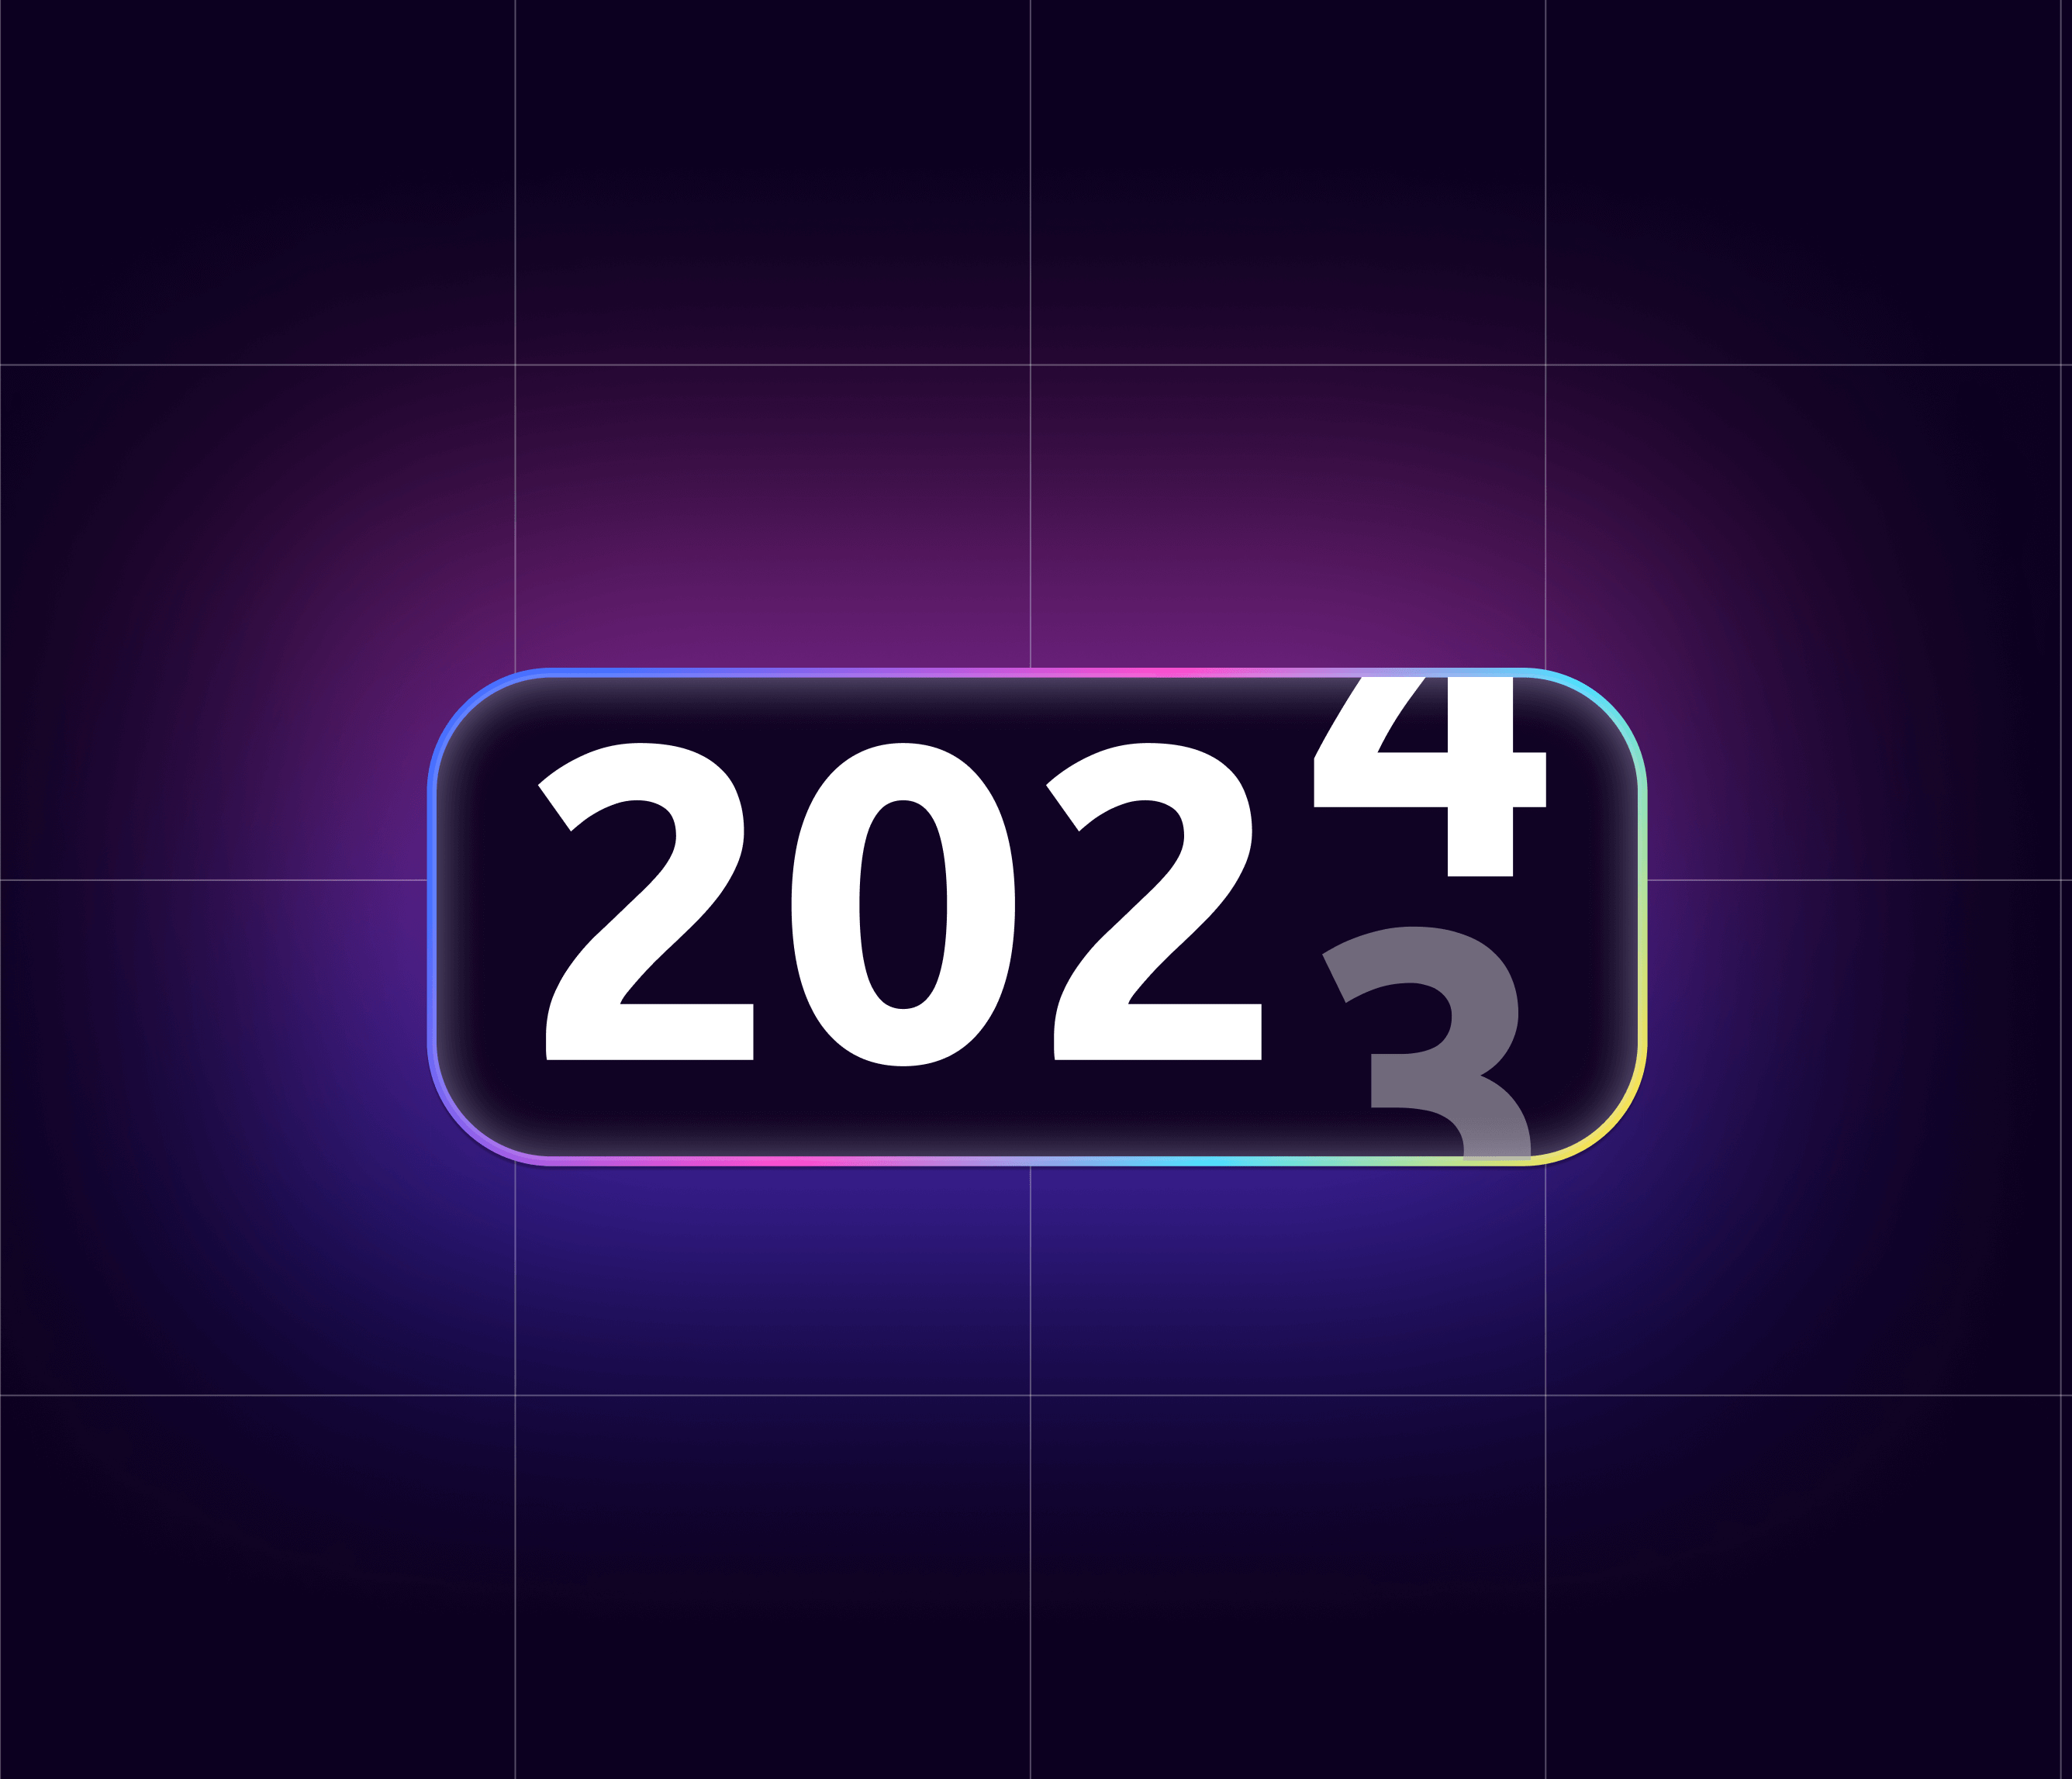 Zeta 2023: Updates and Year in Review